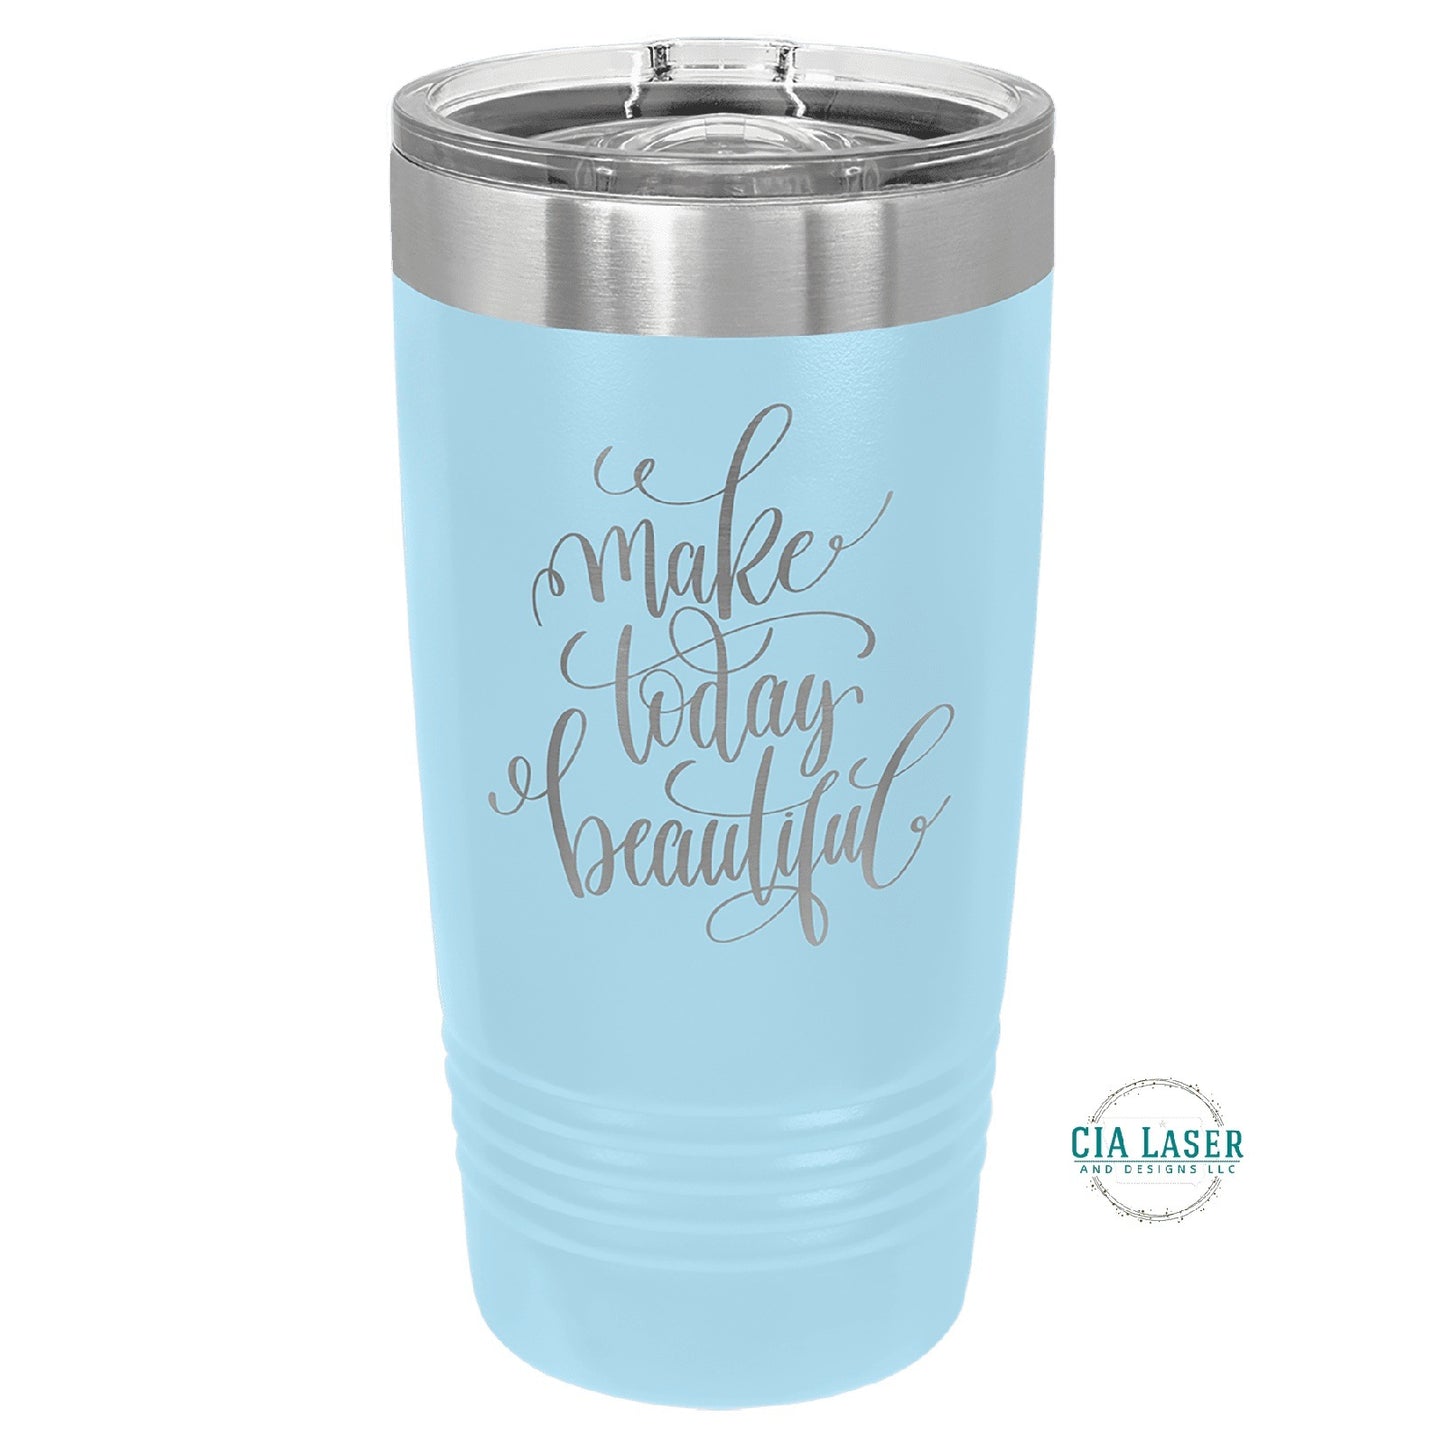 Personalized 20oz Tumbler, ADD YOUR LOGO, Wholesale Tumblers, Laser Engraved Cup, Corporate Gift, Branded, Powder Coated, Bulk Tumblers